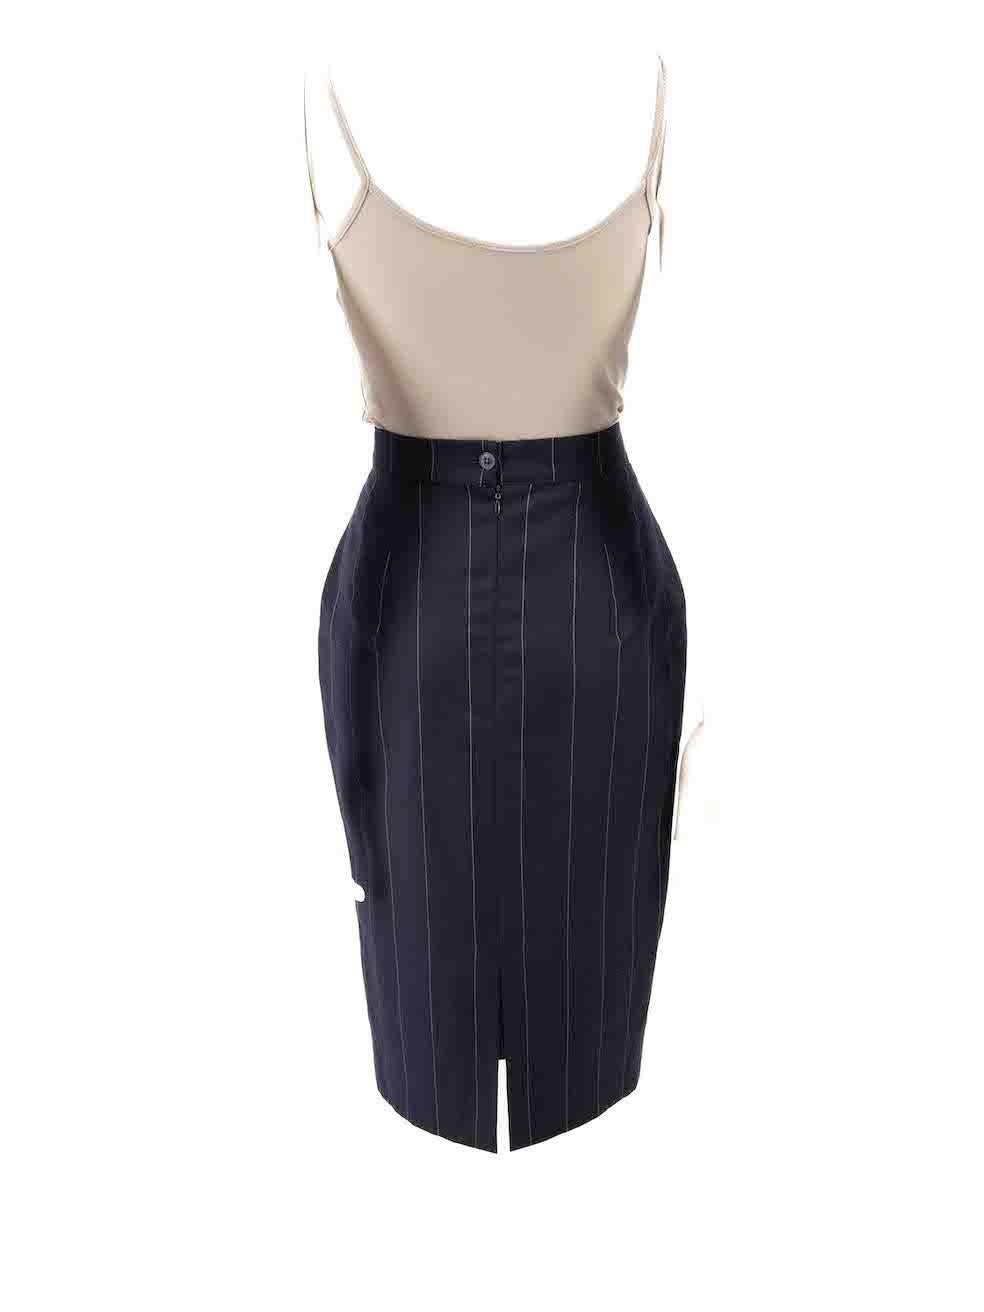 Gai Mattiolo Navy Wool Pin Stripe Skirt Size L In Good Condition For Sale In London, GB